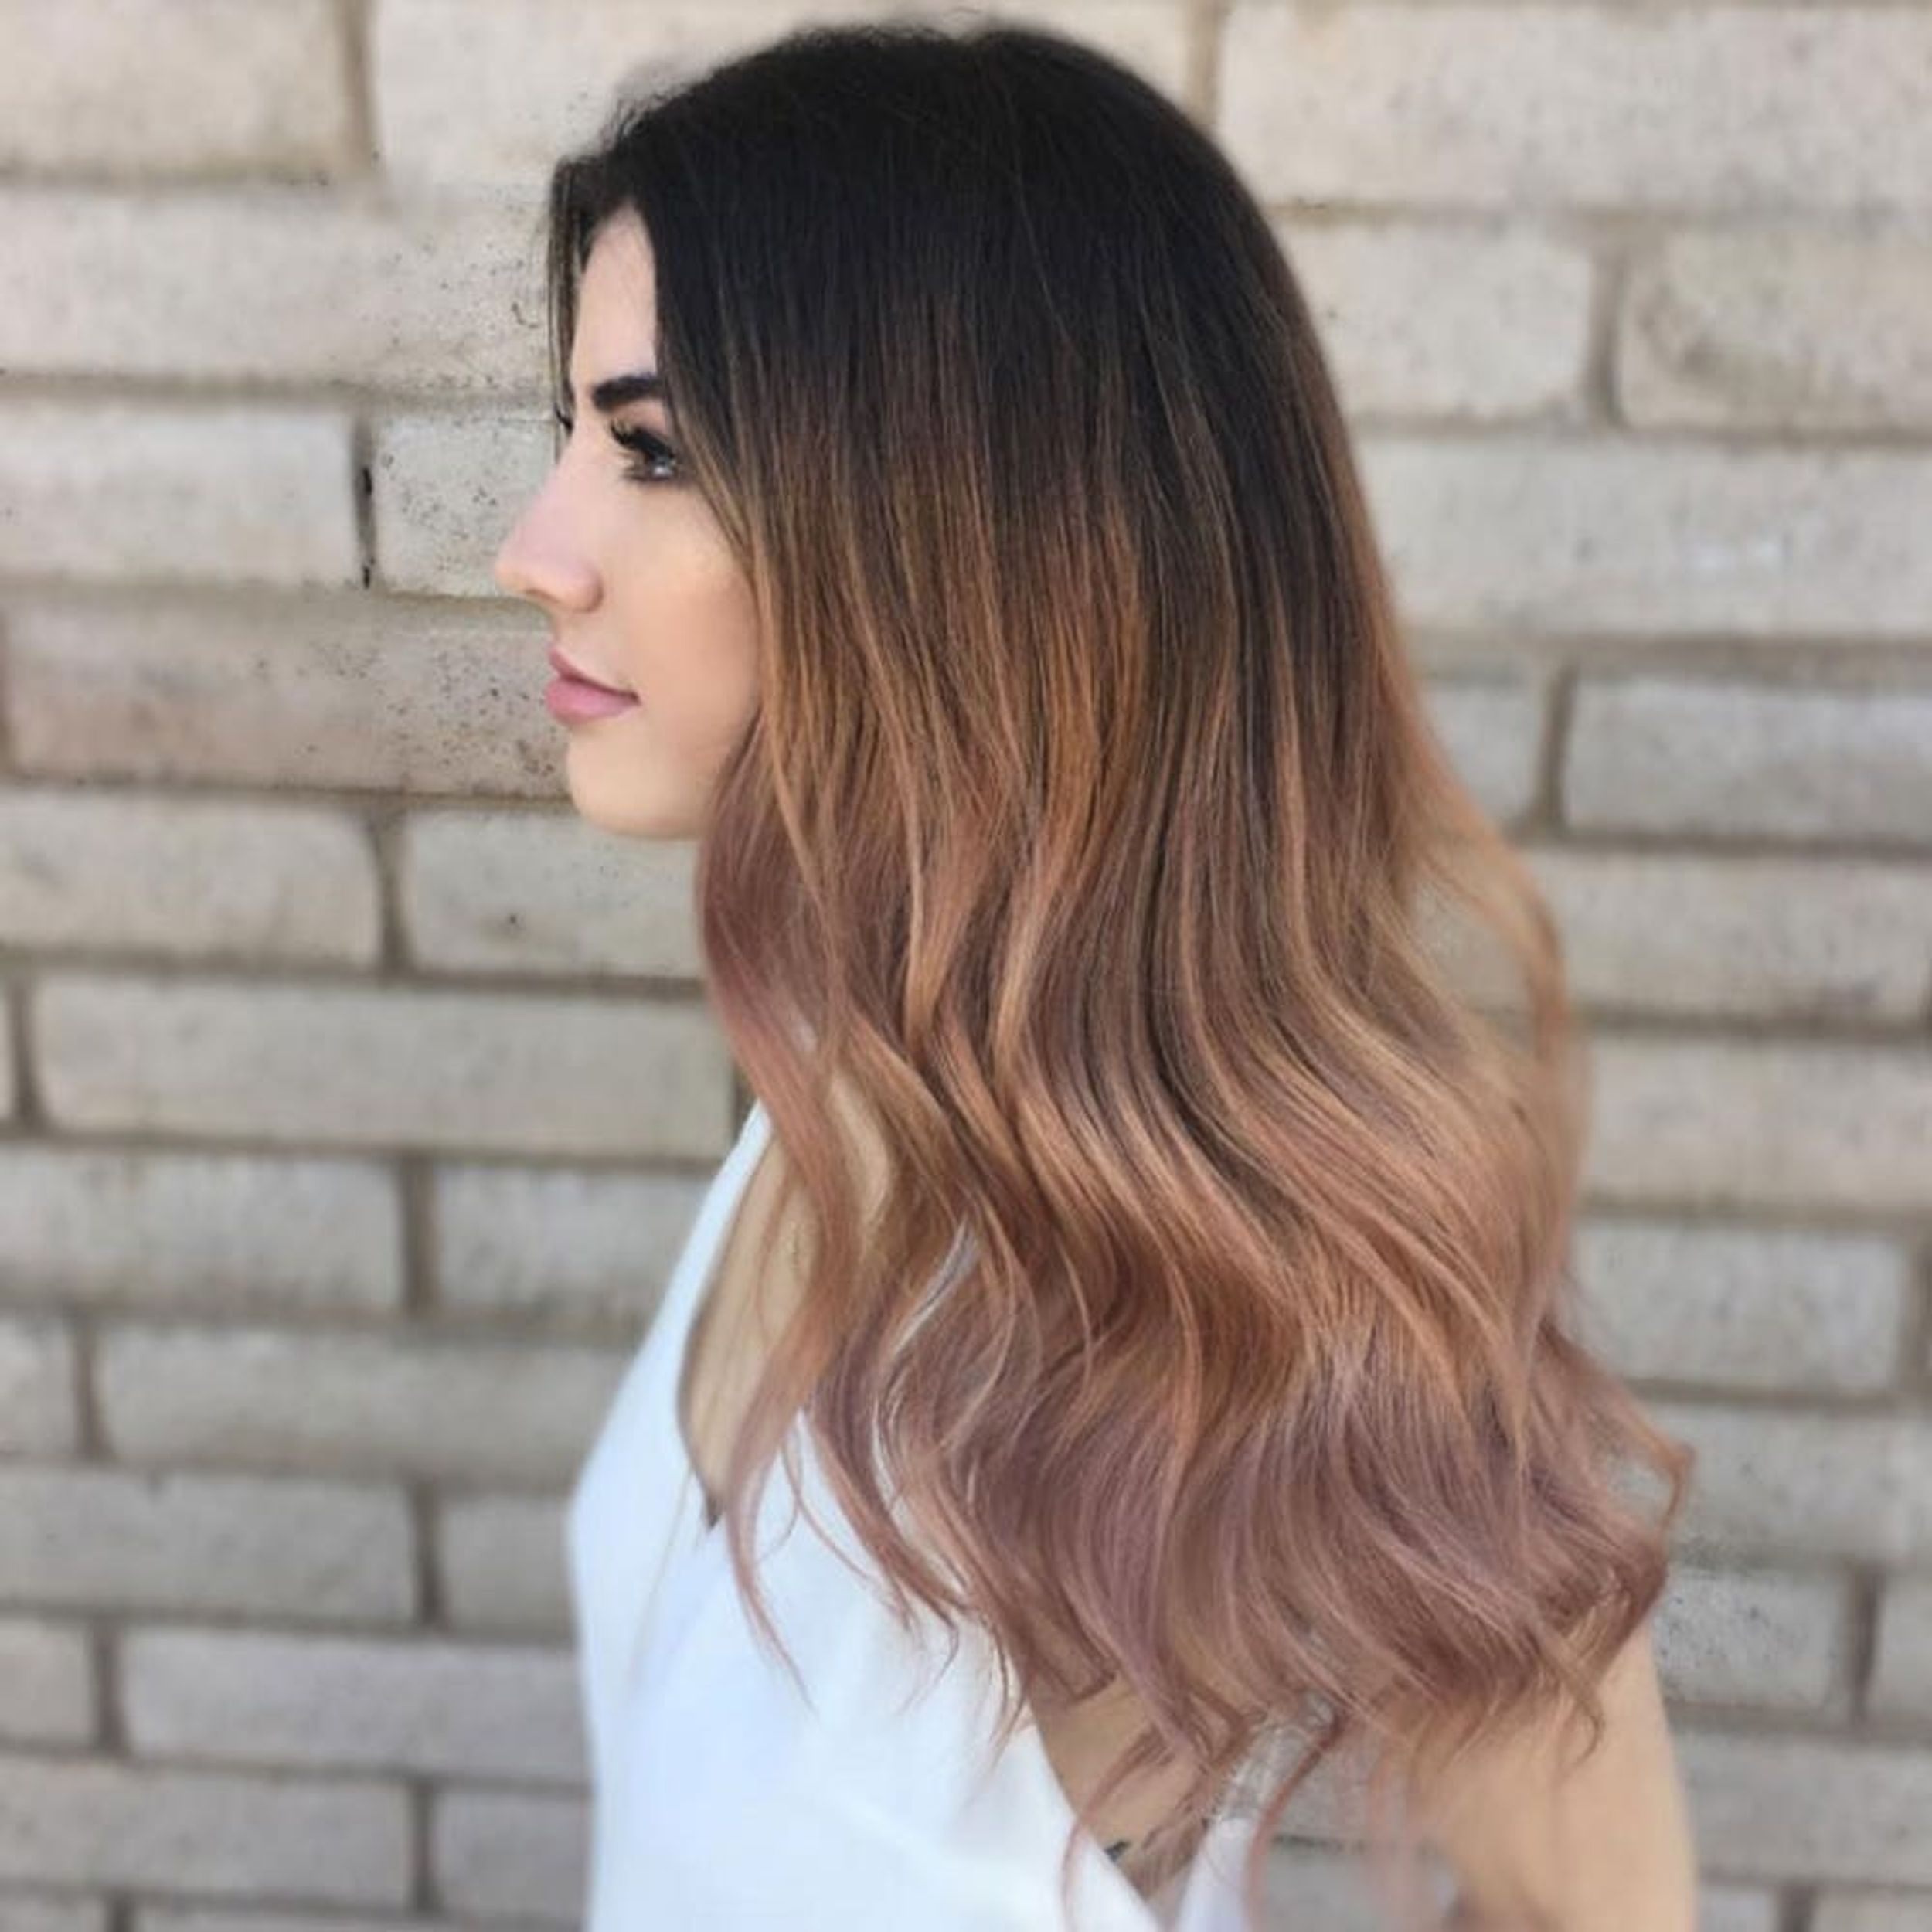 11 MustTry Hair Colors for Spring Brit + Co